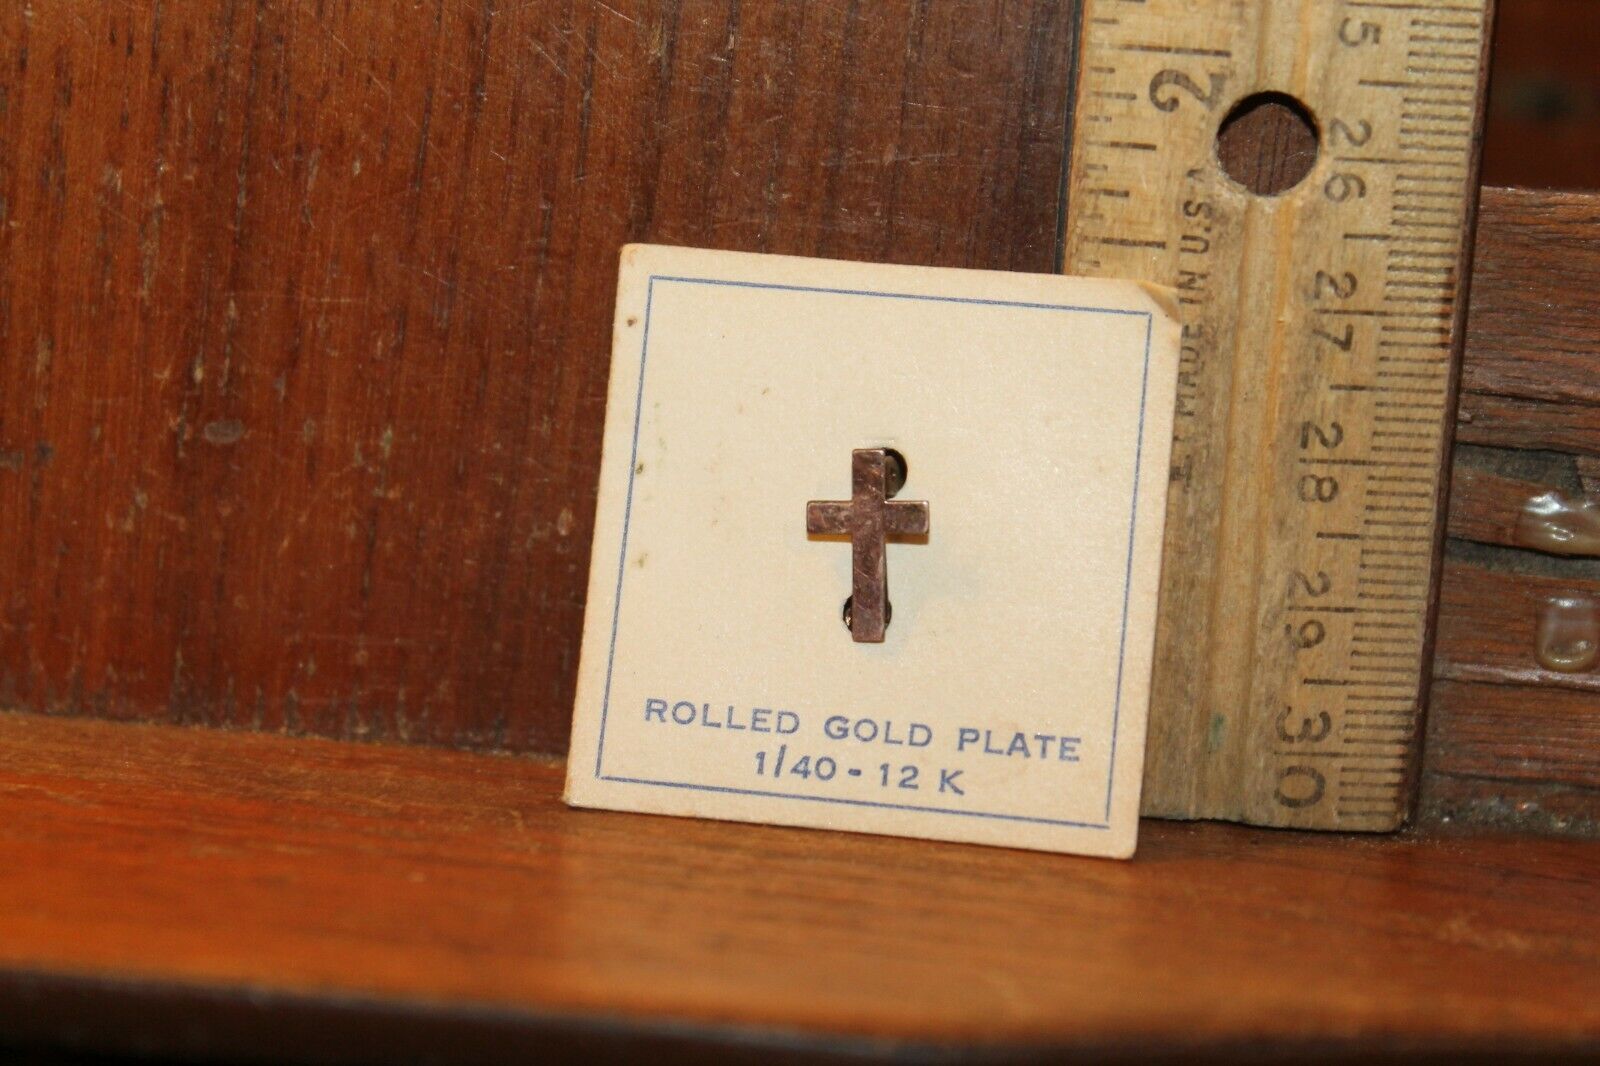 Vintage Lapel Pin Rolled Gold Plate Cross 1/40-12K Christianity 